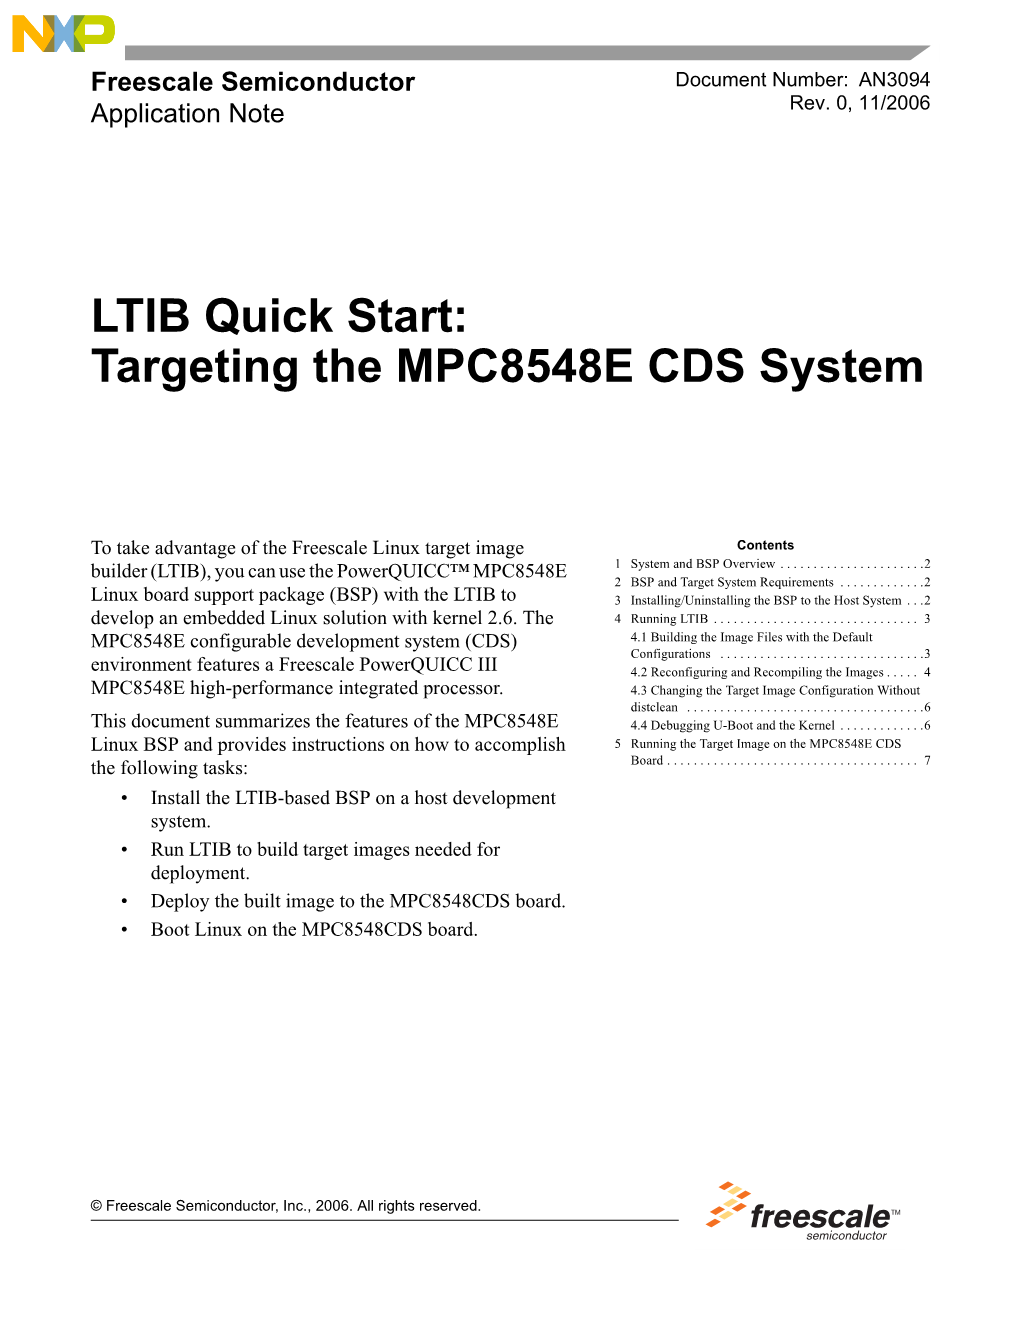 Linux Board Support Package (BSP) with the LTIB to 3 Installing/Uninstalling the BSP to the Host System